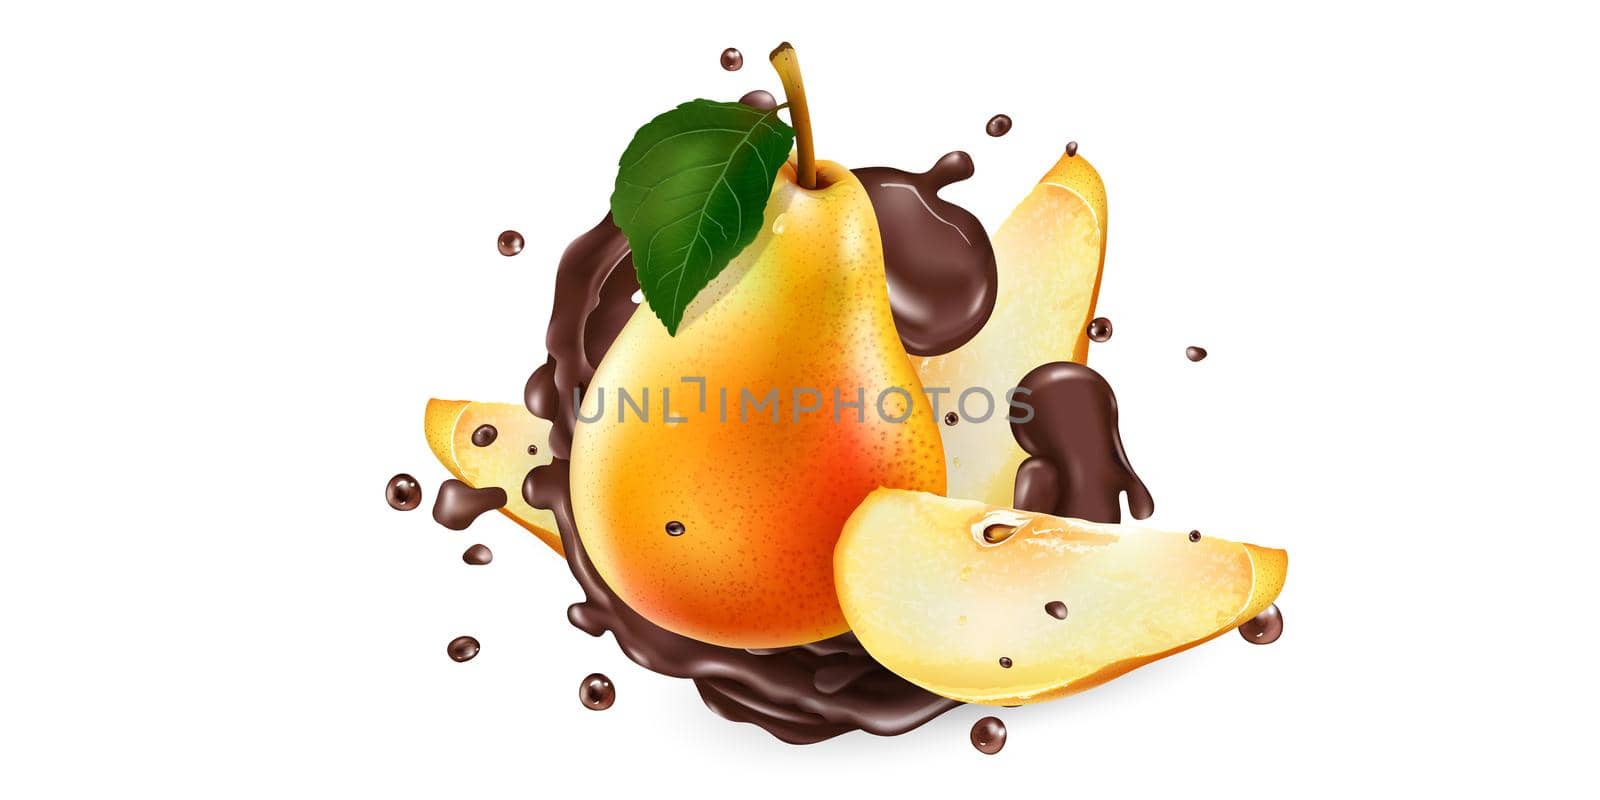 Whole and sliced pears in chocolate splashes on a white background. Realistic style illustration.